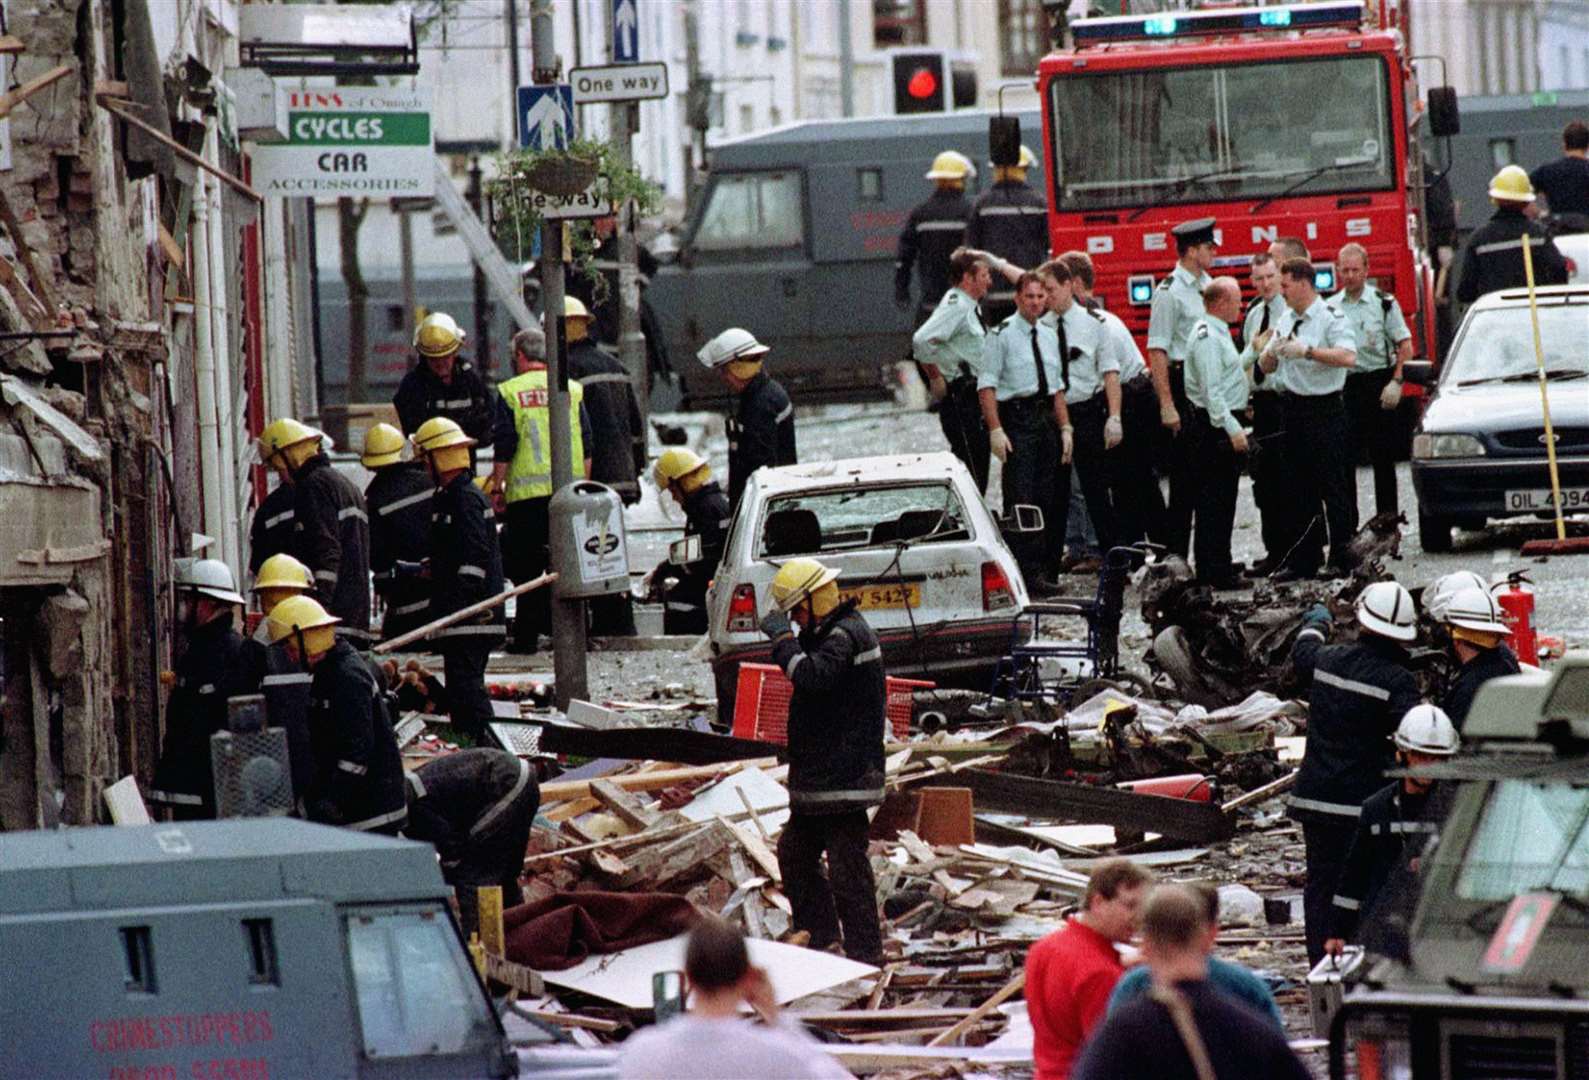 Police officers and firefighters inspect the damage caused by a bomb in Omagh (Paul McErlane/PA)